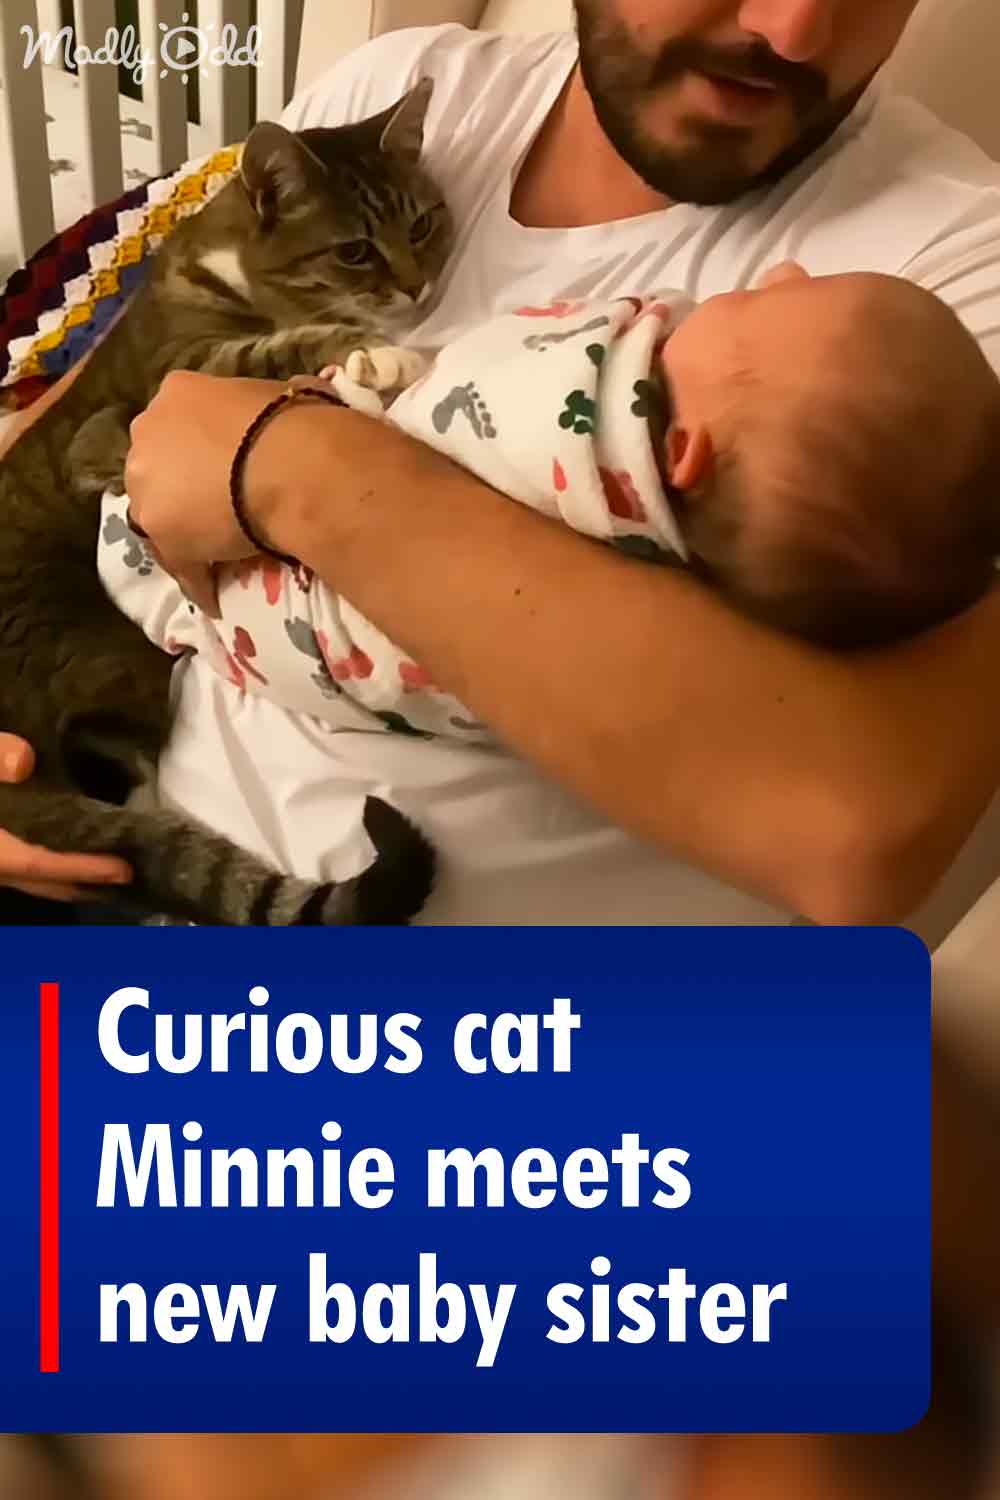 Curious cat Minnie meets new baby sister